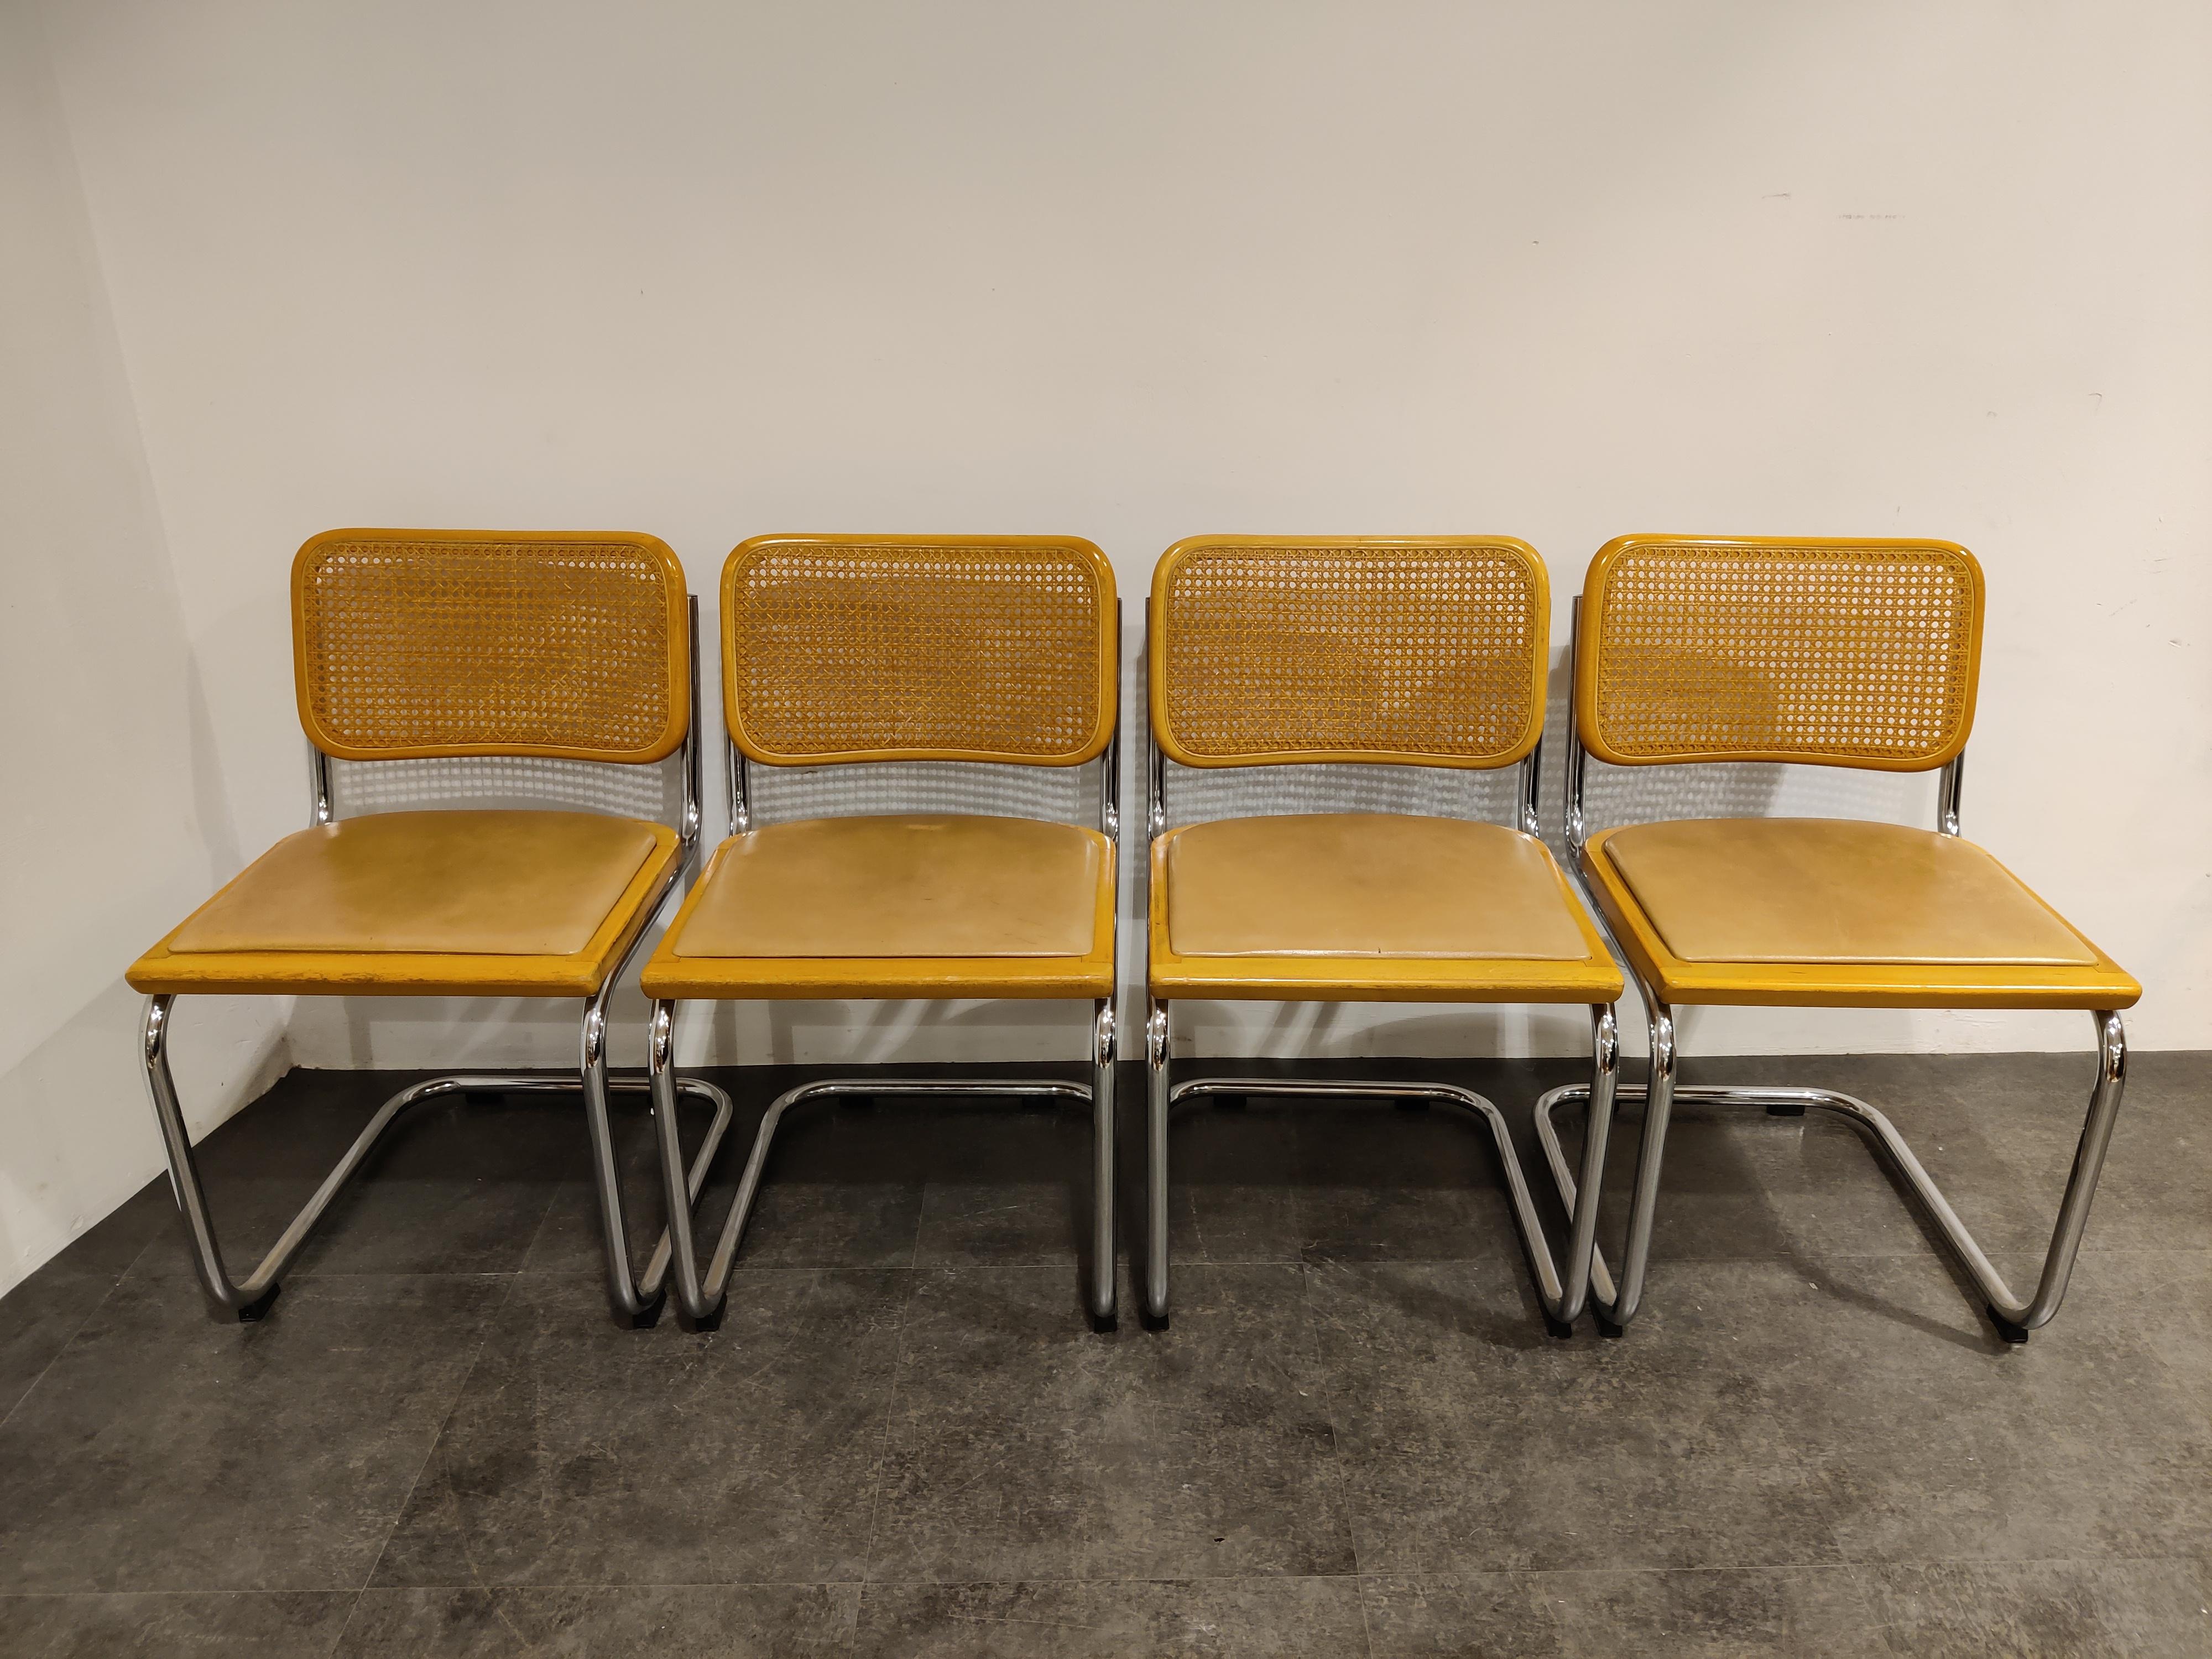 Late 20th Century Vintage Marcel Breuer Cesca Style Chairs Set of 8, Made in Italy, 1970s